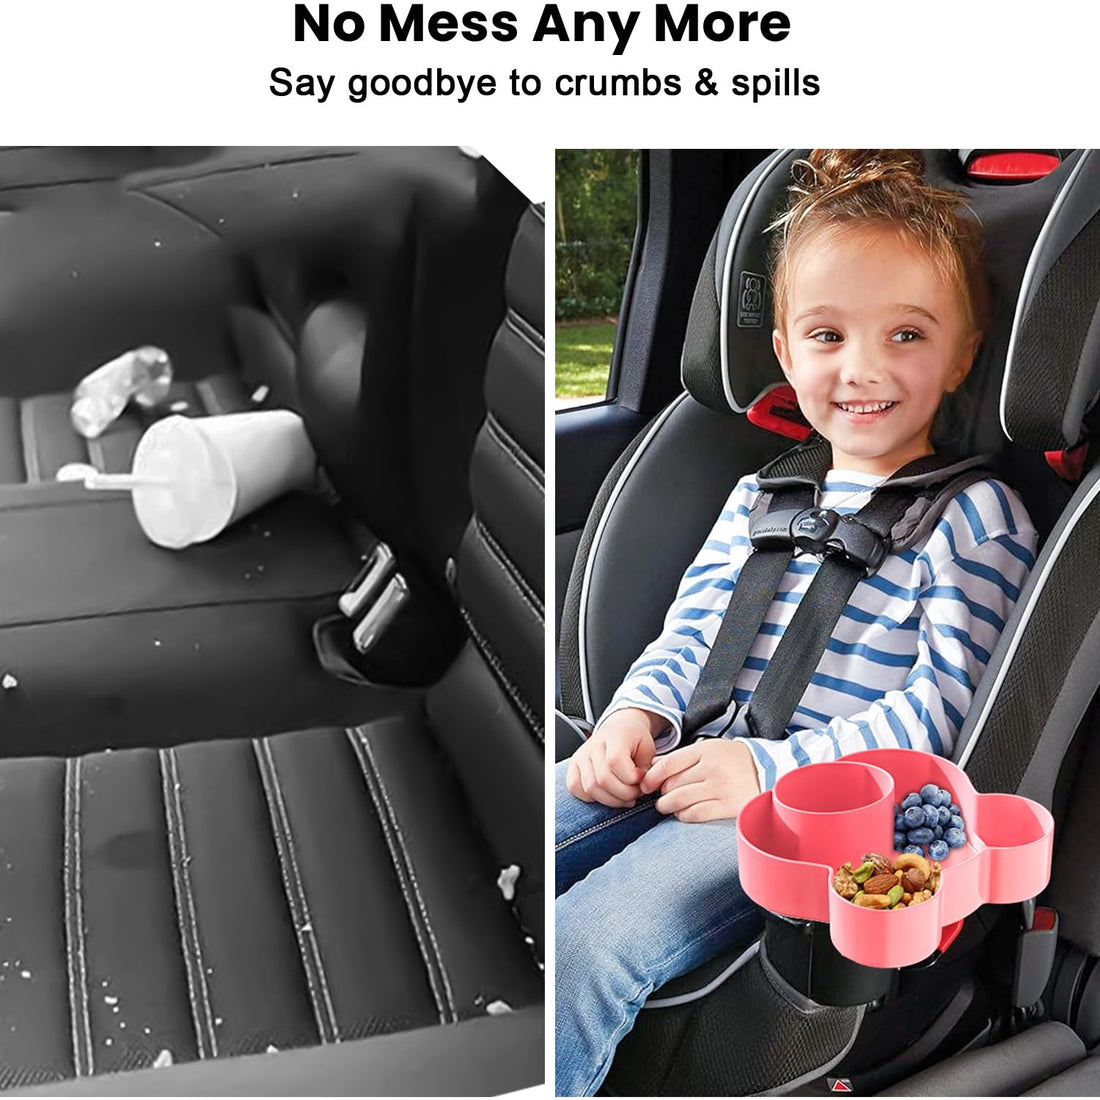 Car Seat Tray - Convert Cup Holder to a Tray for Snacks, Toys and Accessories, 360° Rotatable Car Seat Tray for Kids Travel, Cup Holder Tray for Car Seats, Booster, Stroller and More Cup Holder (Pink)